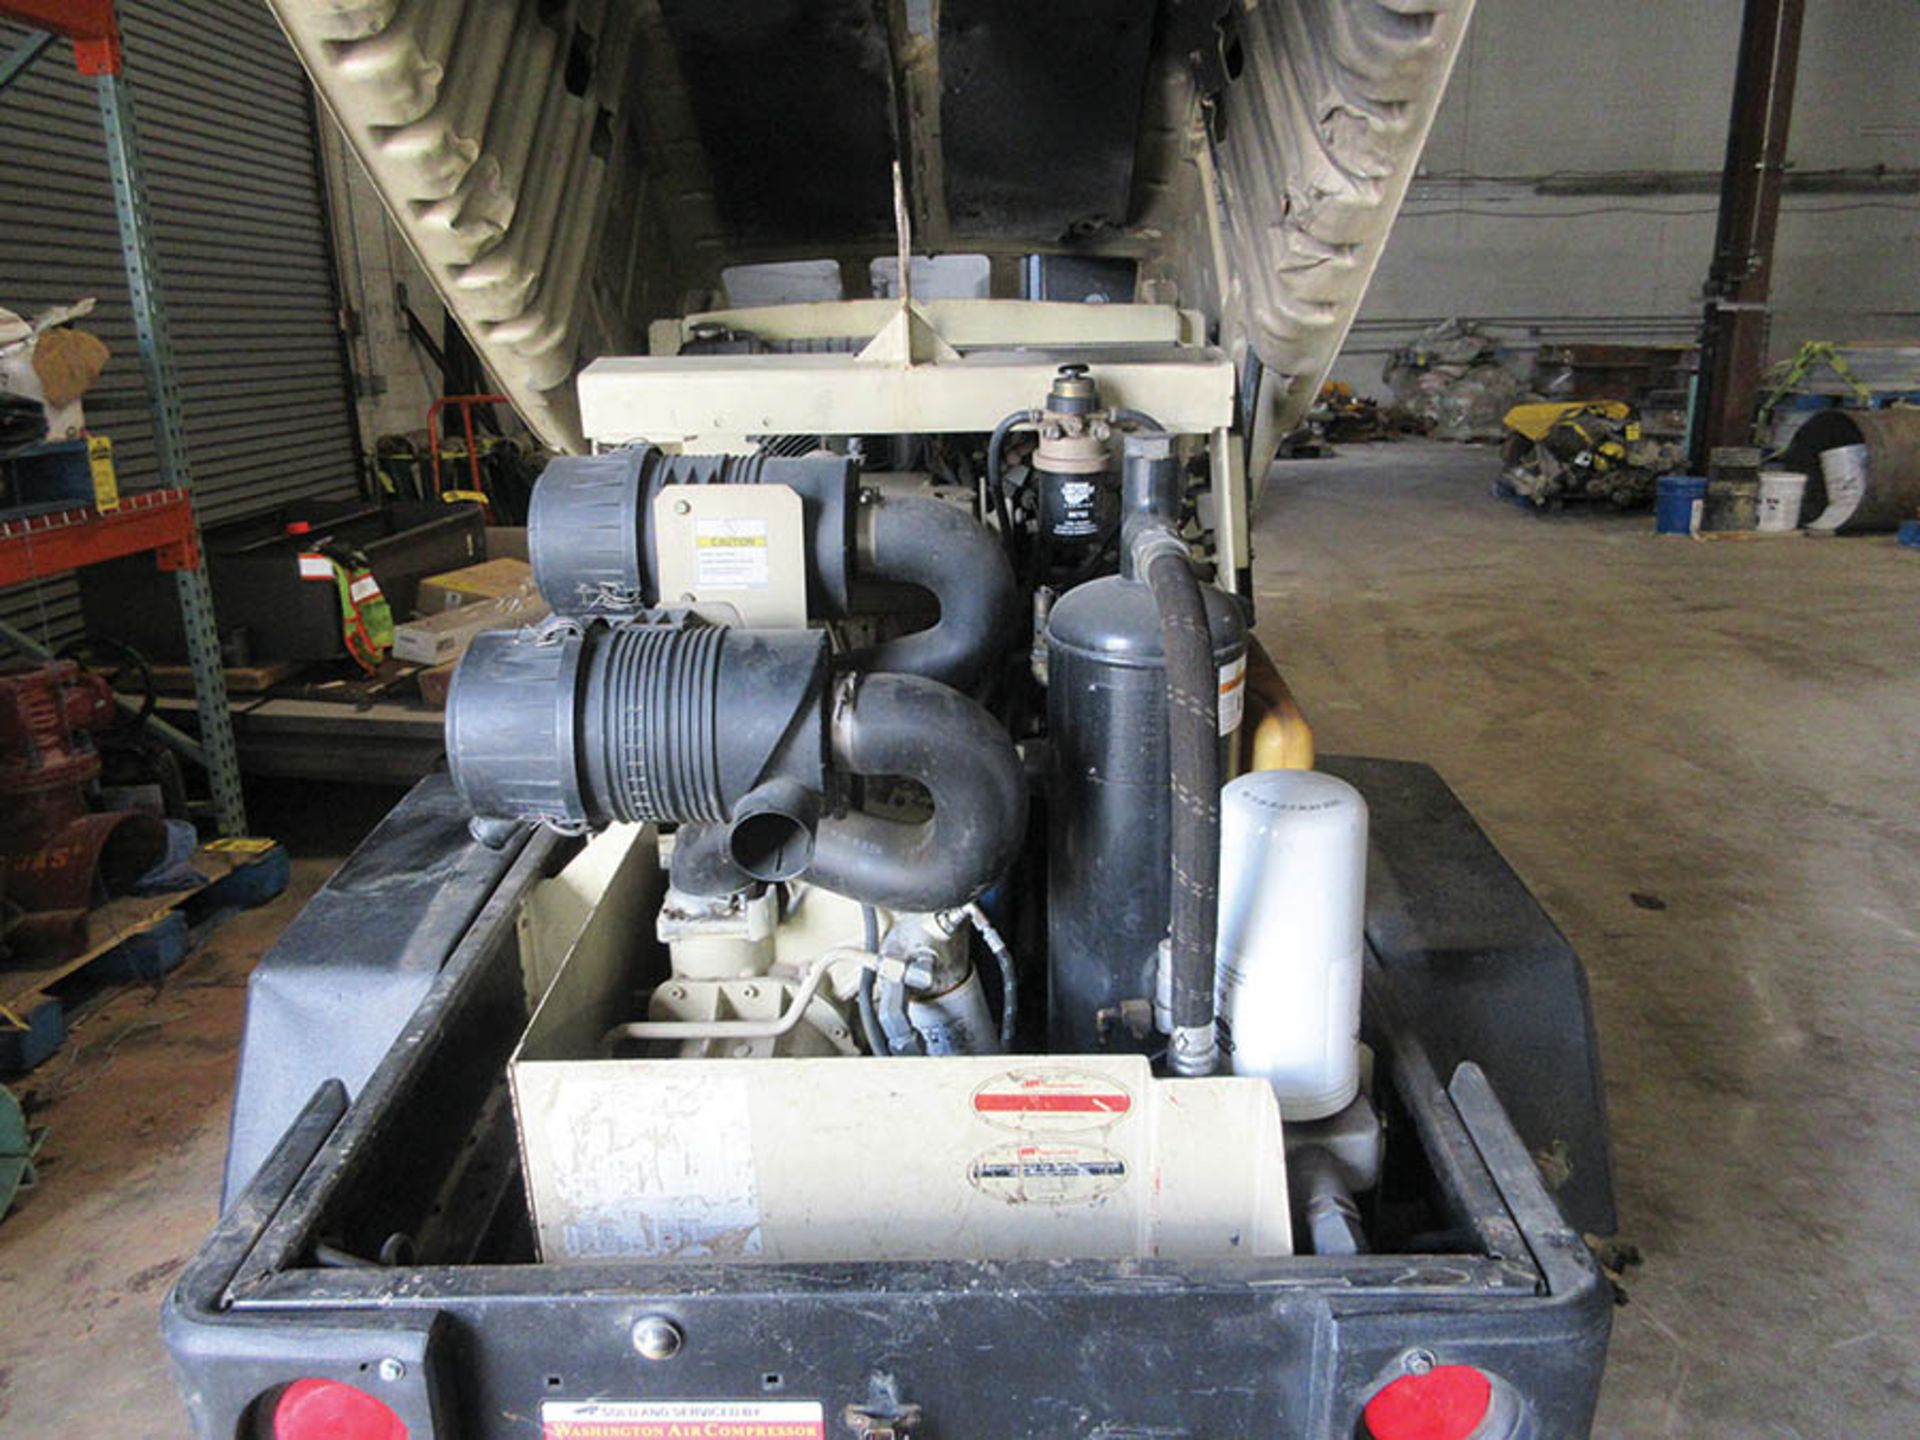 INGERSOLL RAND AIR SOURCE PLUS 185 TOWABLE AIR COMPRESSOR, 1731 HOURS, S/N 397294UASB10 (2008) - Image 3 of 5